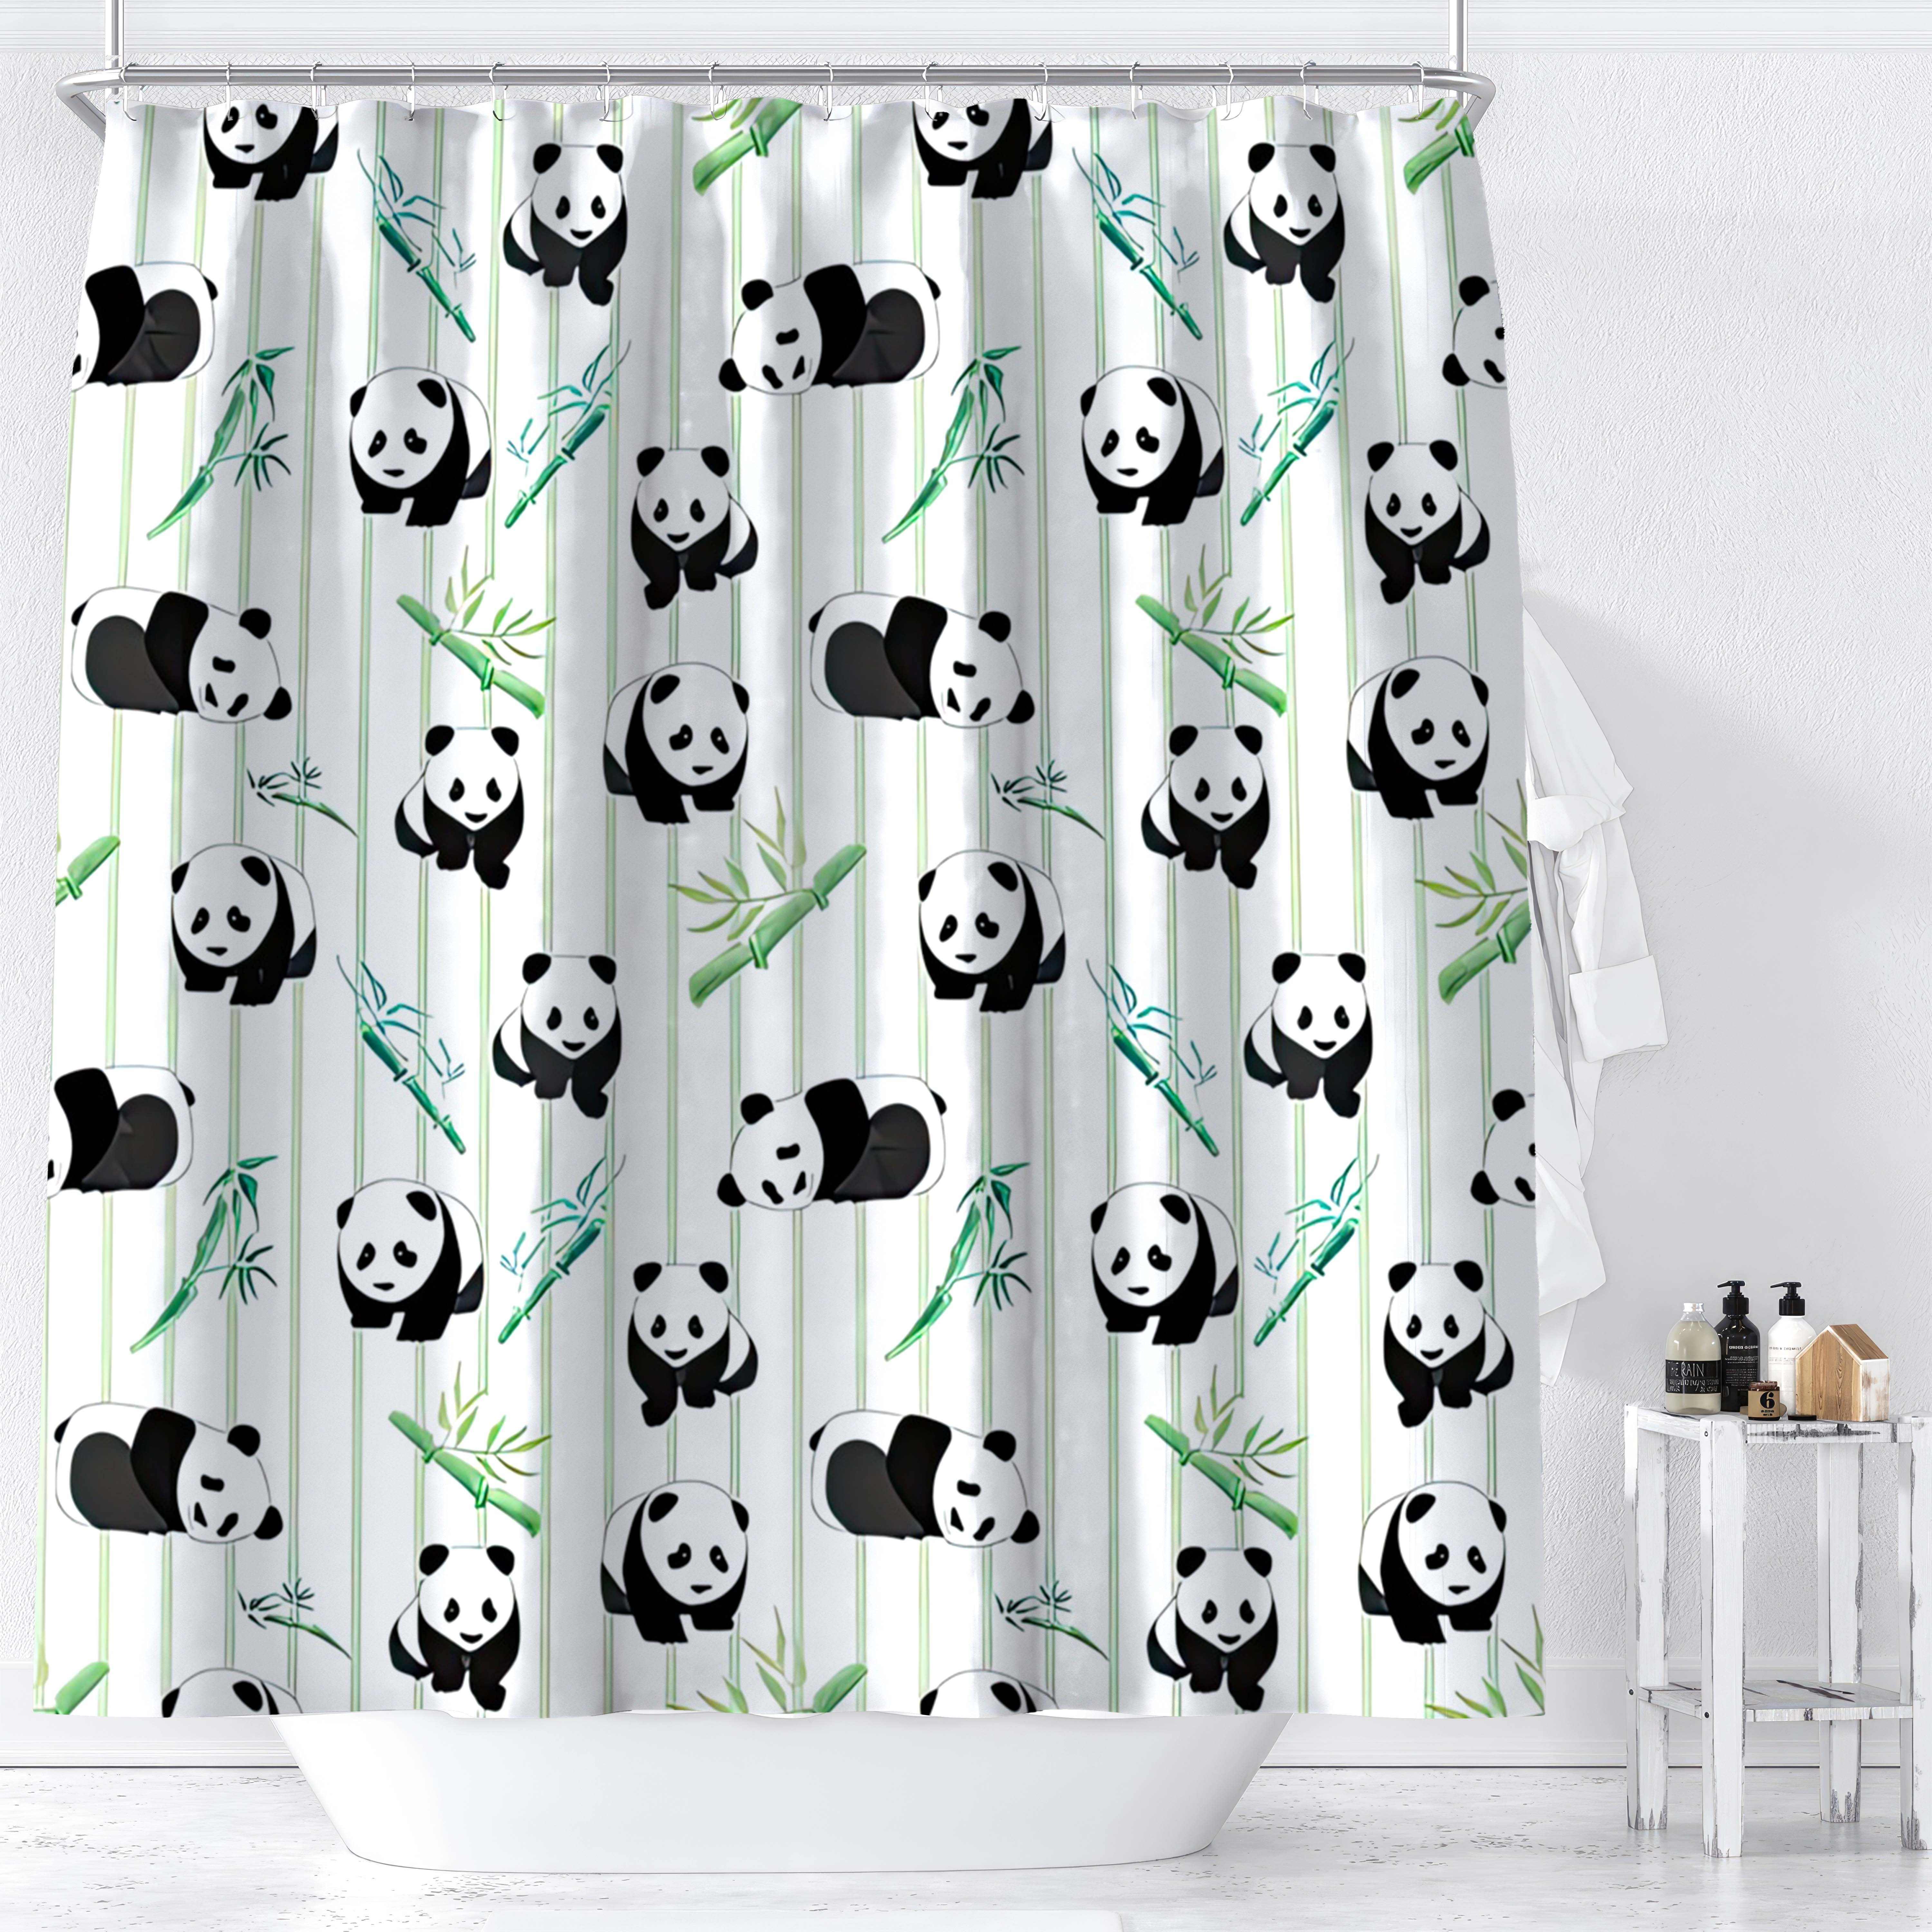 

Ywjhui Cartoon Panda And Bamboo Pattern Shower Curtain - Water-resistant Polyester Animal Theme Decor With Hooks, Machine Washable Knit Weave All-season Bathroom Accessory